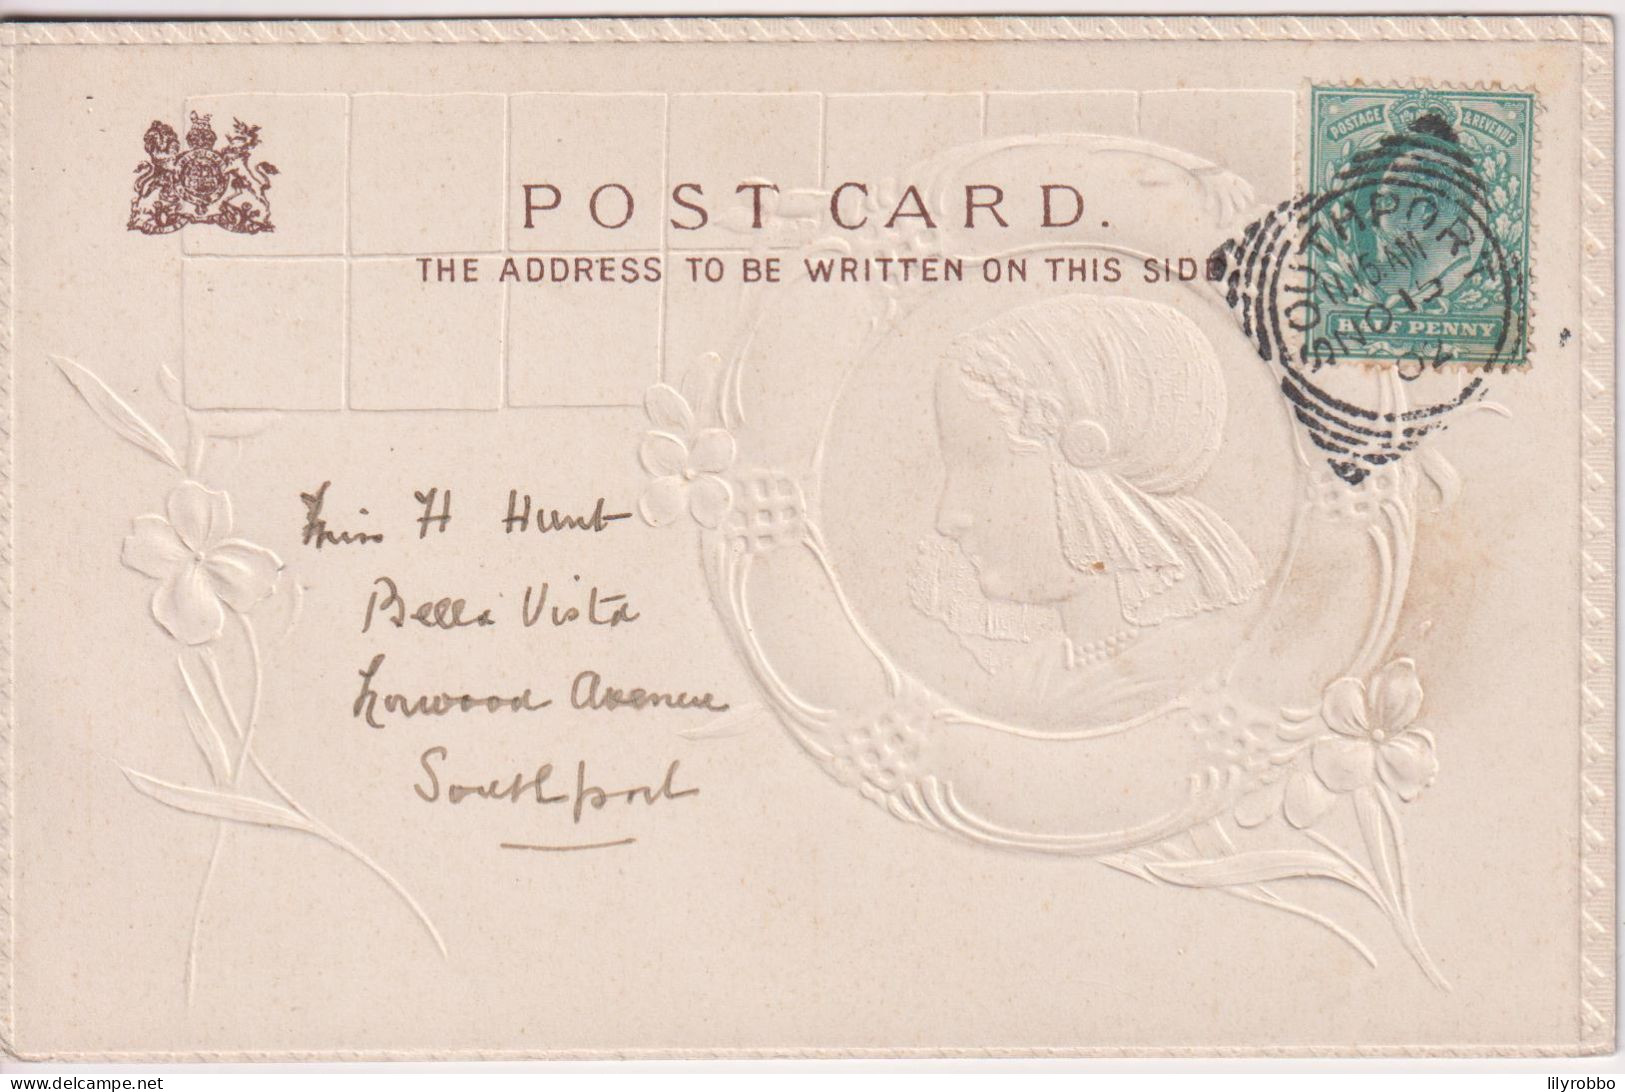 NETHERLANDS - Embossed Card Of Fishing Boats & Young Girl. Undivided - Southport SQ PM 1902 - Fischerei